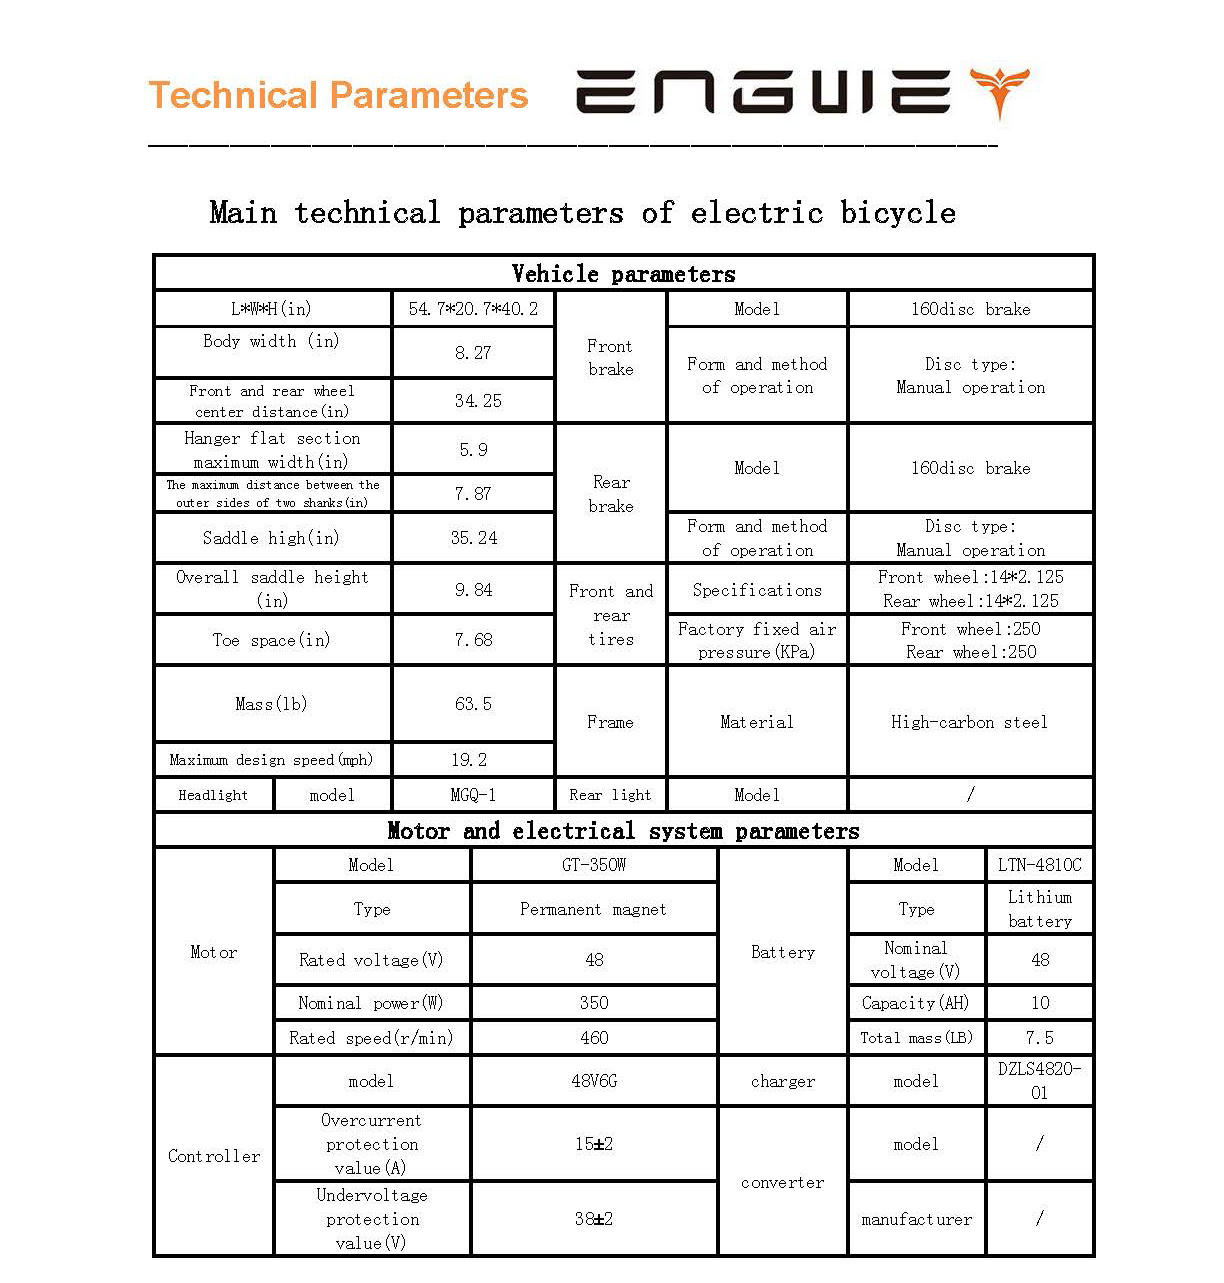 Engwe T14 technical specification